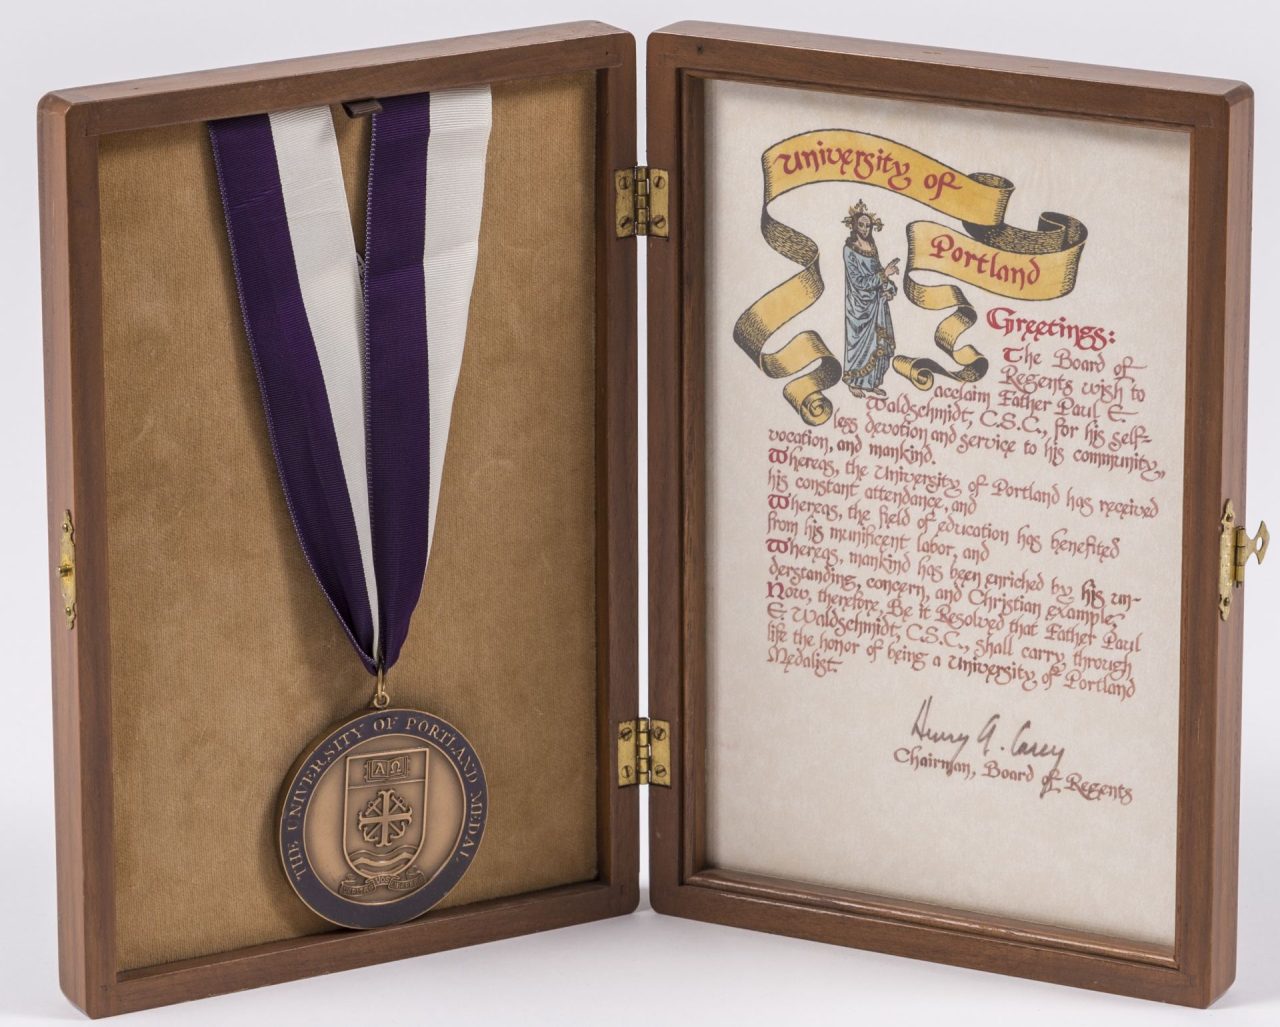 Medal attached to a purple and white ribbon, descriptive text, and recipient Father Paul E. Waldschmidt.